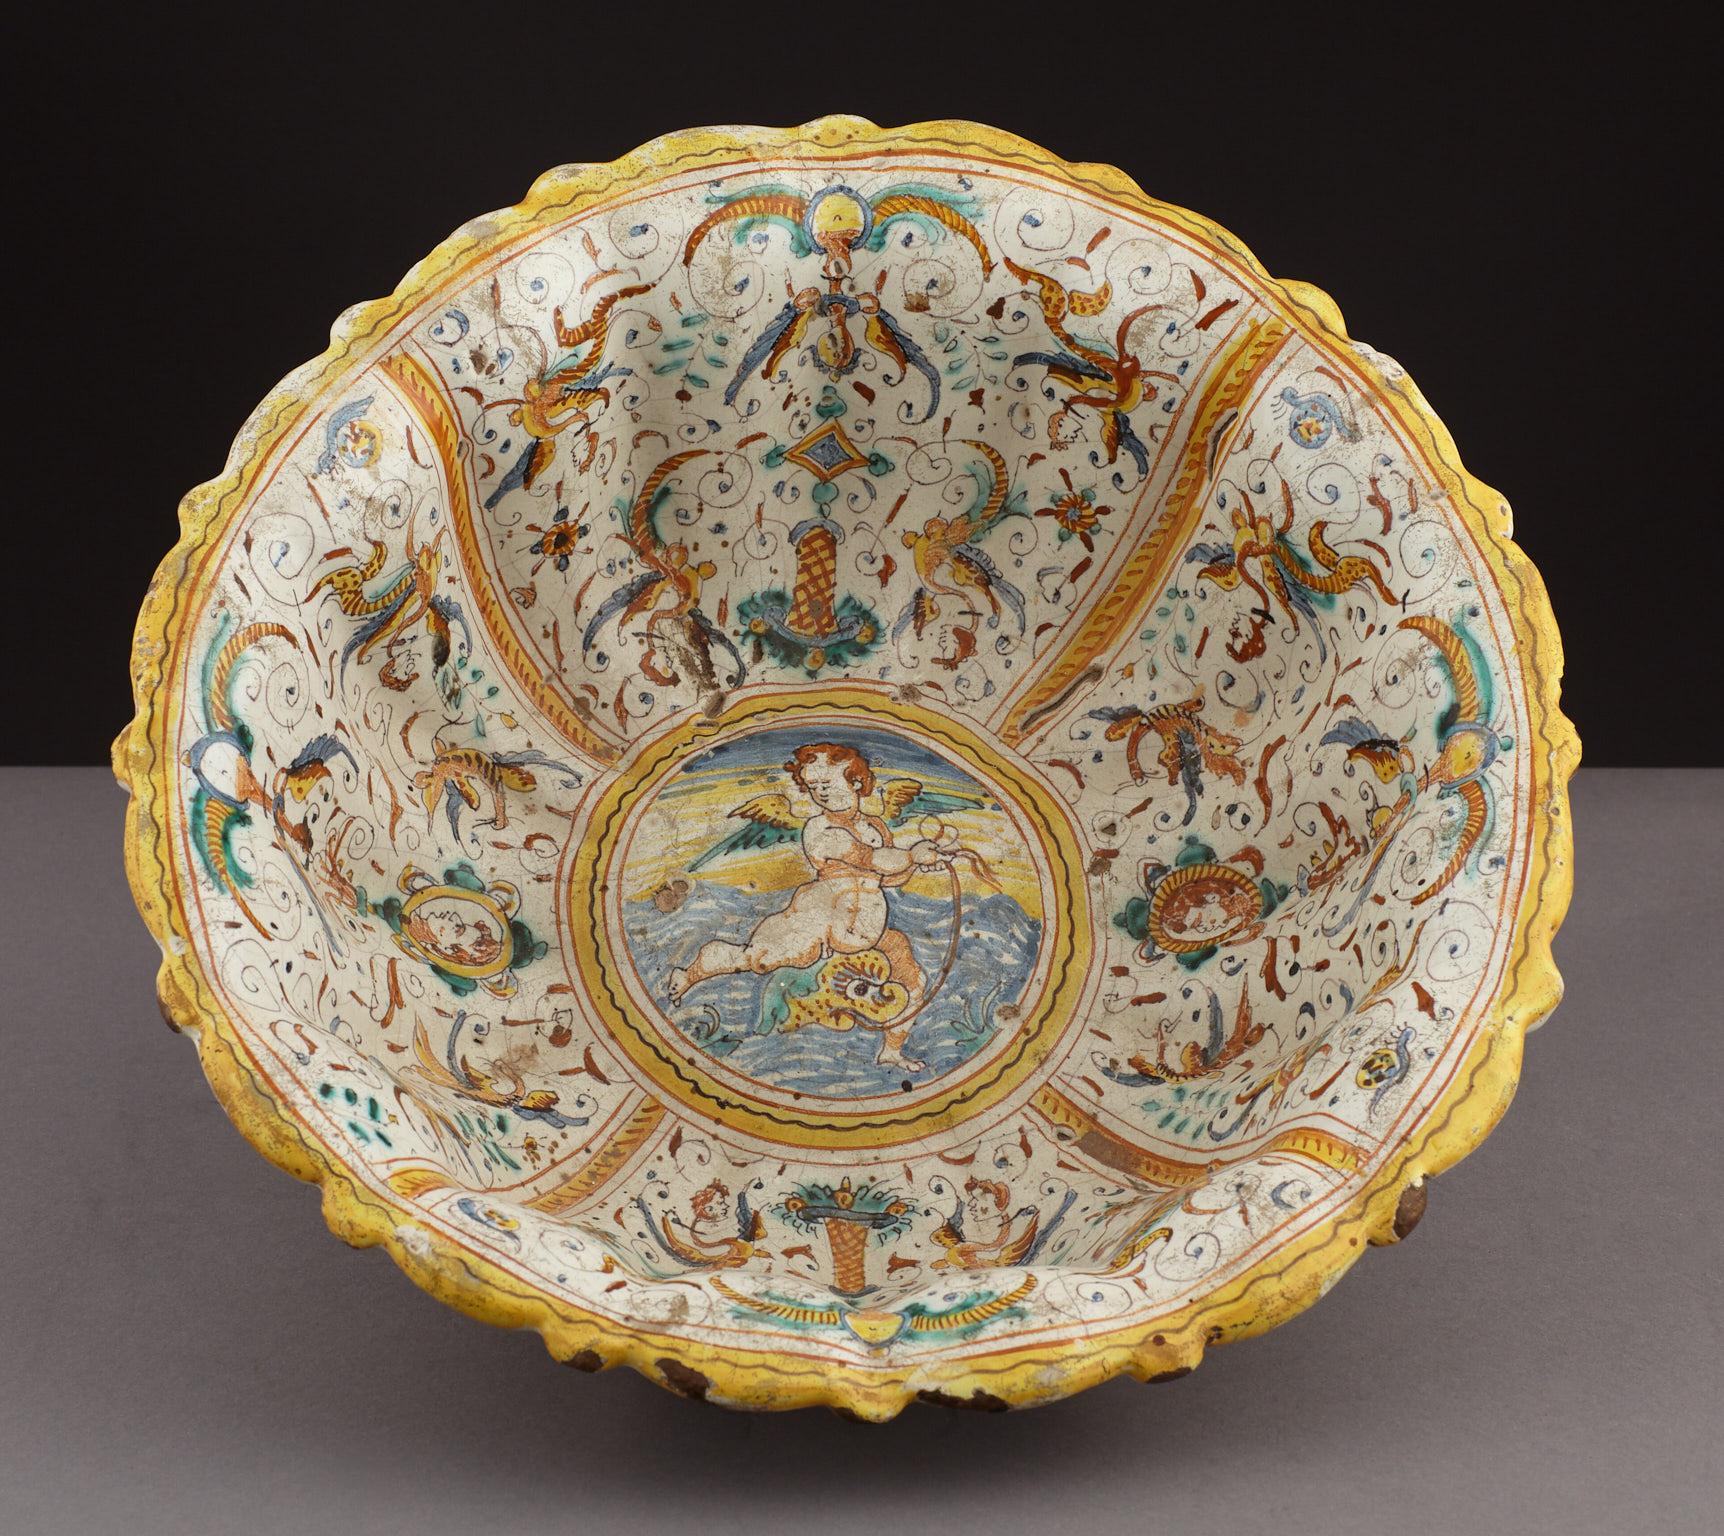 Late 16th-early 17th century comependiario Majolica bowl, Italian, circa 1600-1620.

The white lead glazed deep fluted bowl with compendiario Renaissance decoration, centered on a cherub fishing, with alternating floral panels with birds and